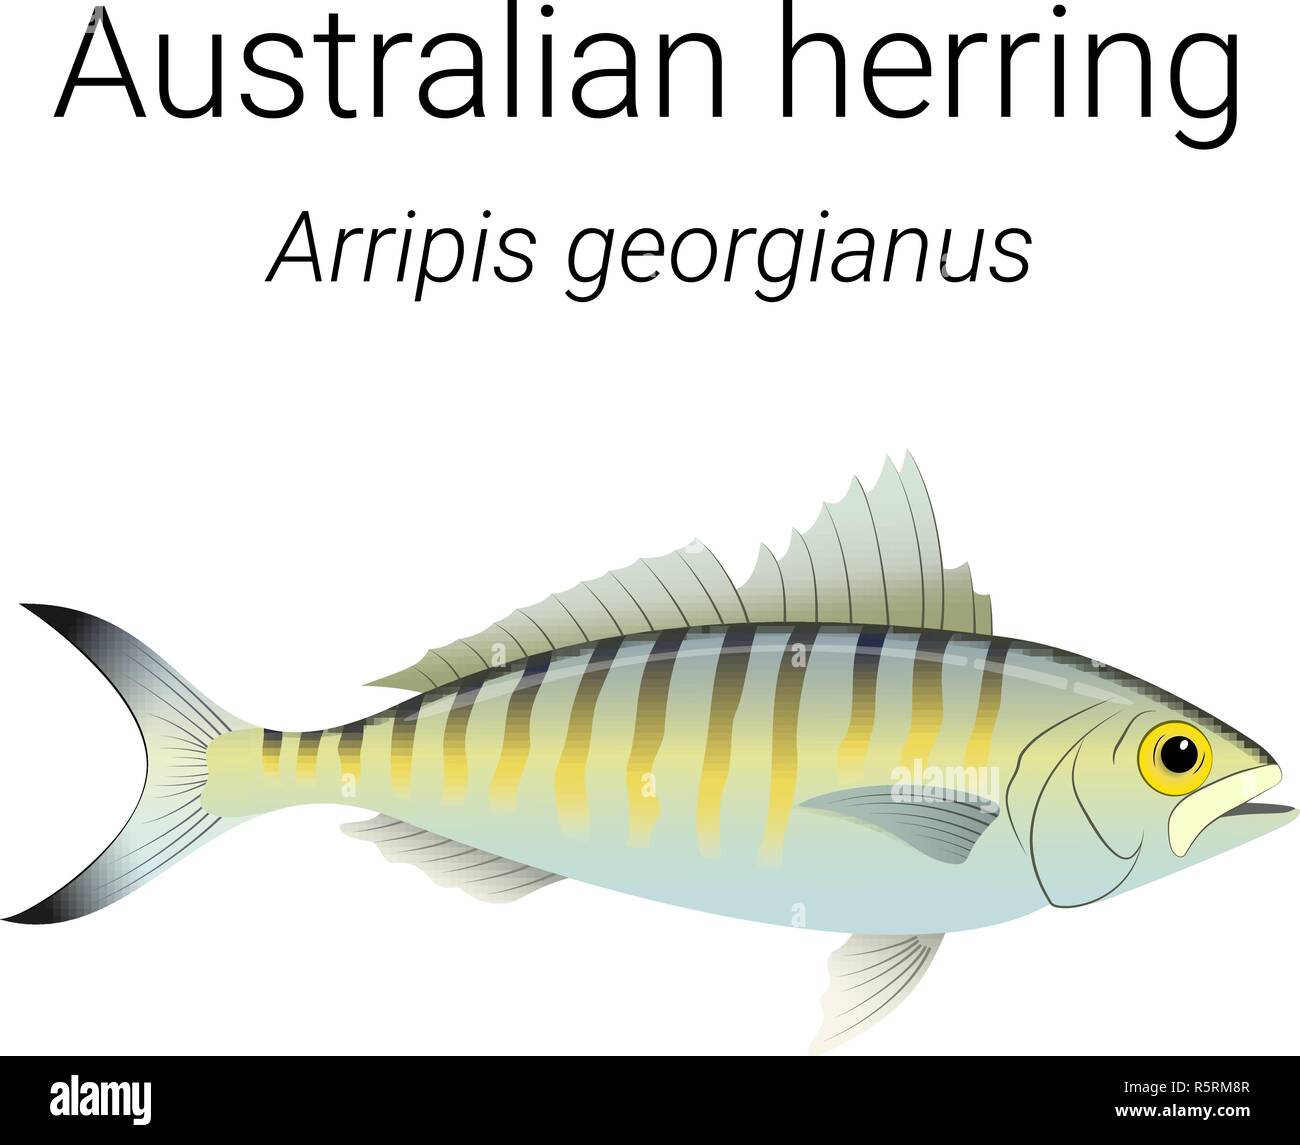 Australian herring also known as Tommy ruff - endemic Australian fish species found in the coastal waters of Southern Australia illustration Stock Vector